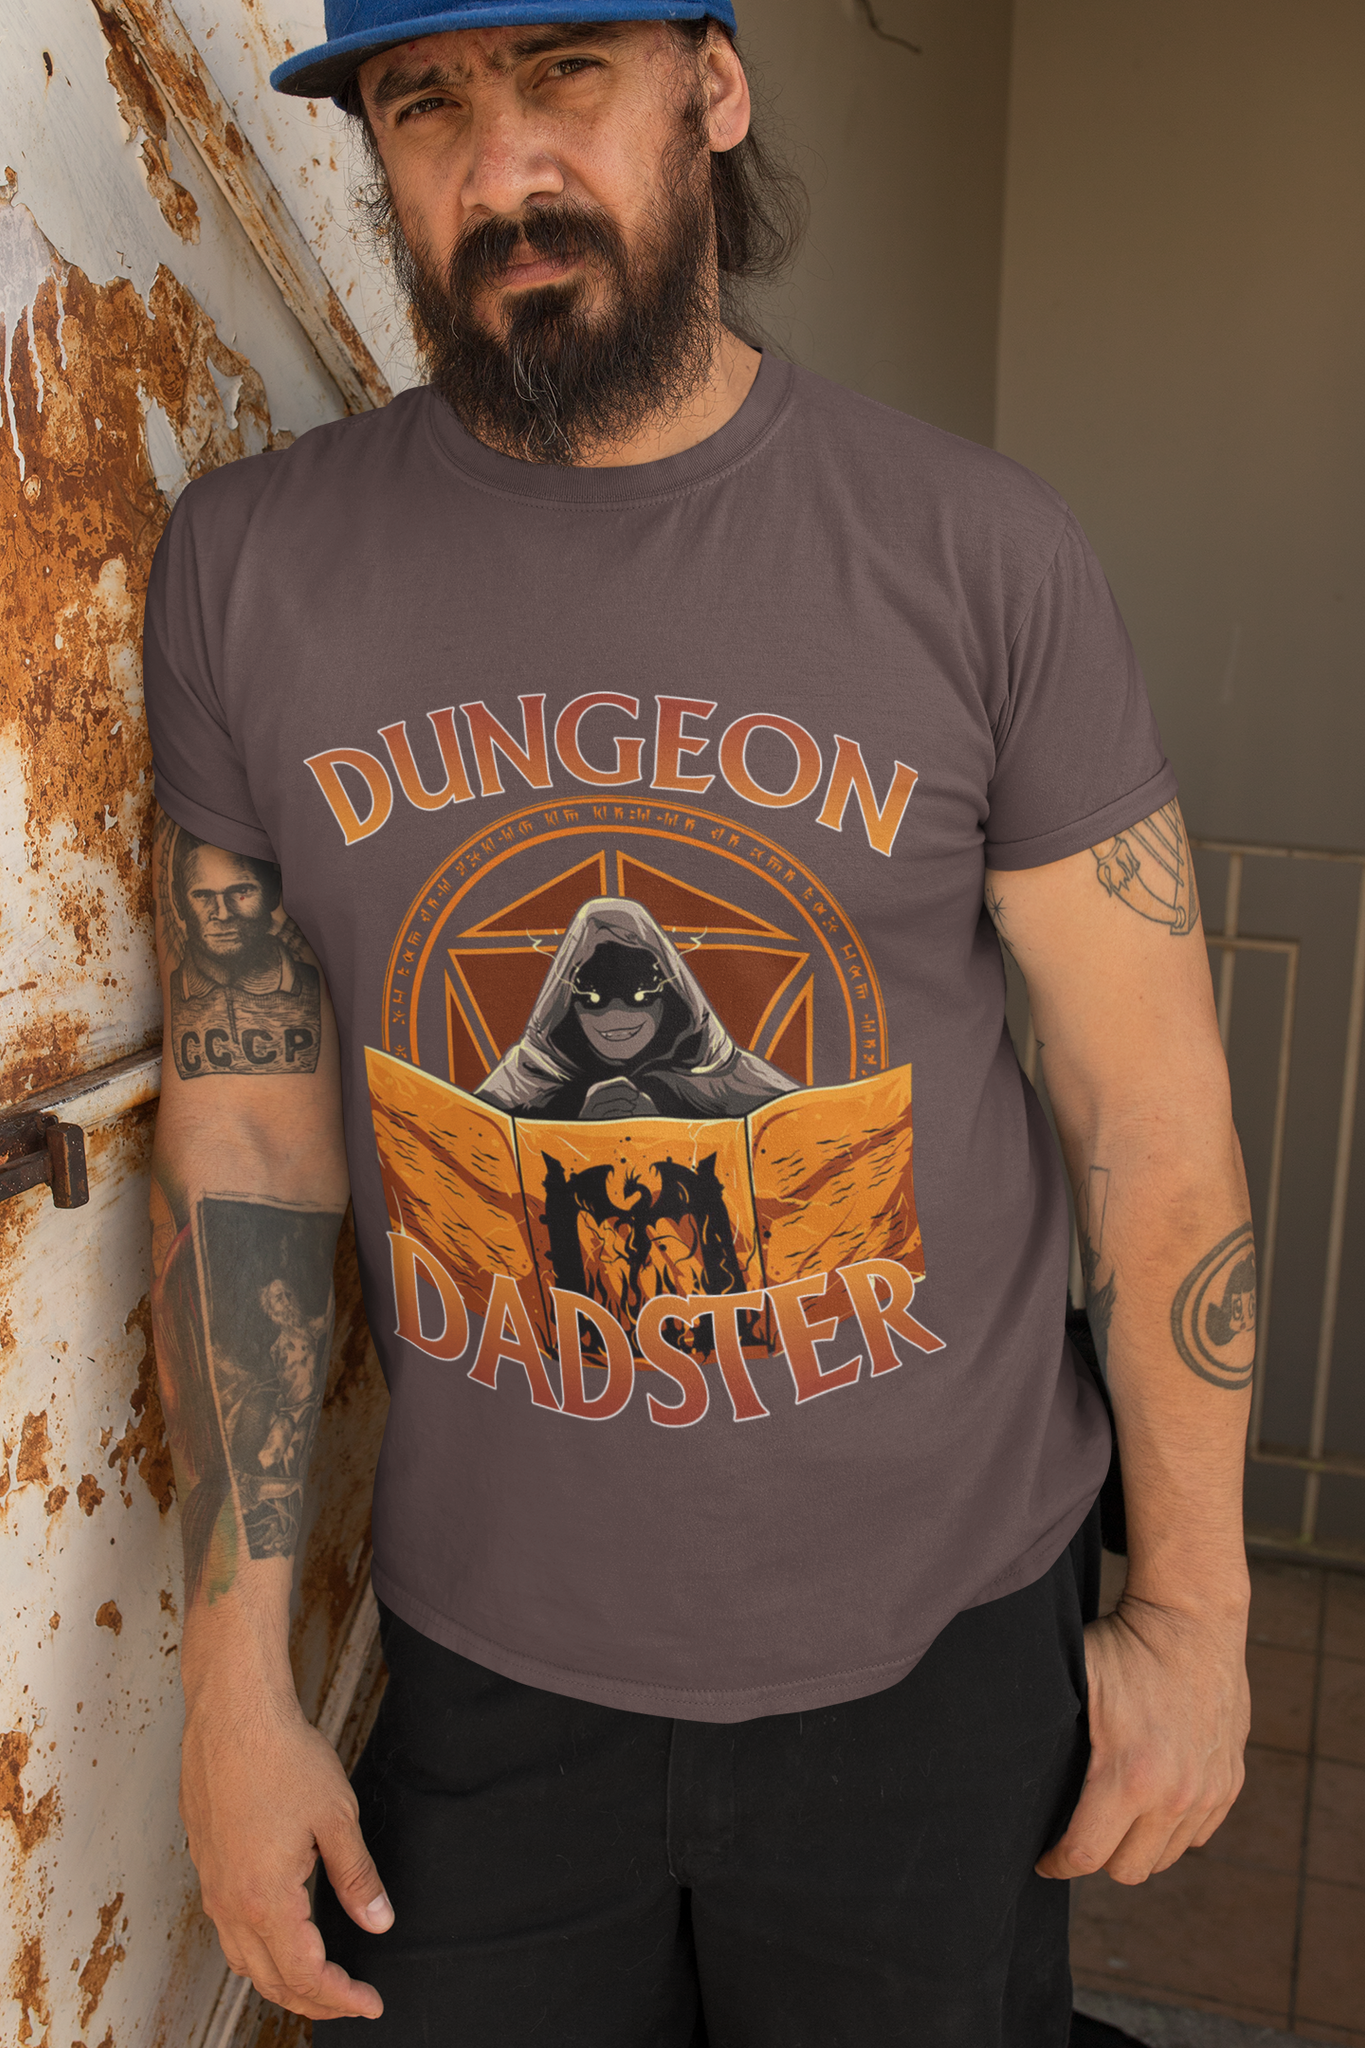 Dungeon And Dragon T Shirt, RPG Dice Games Tshirt, Dungeon Dadster DND T Shirt, Father Day Gifts